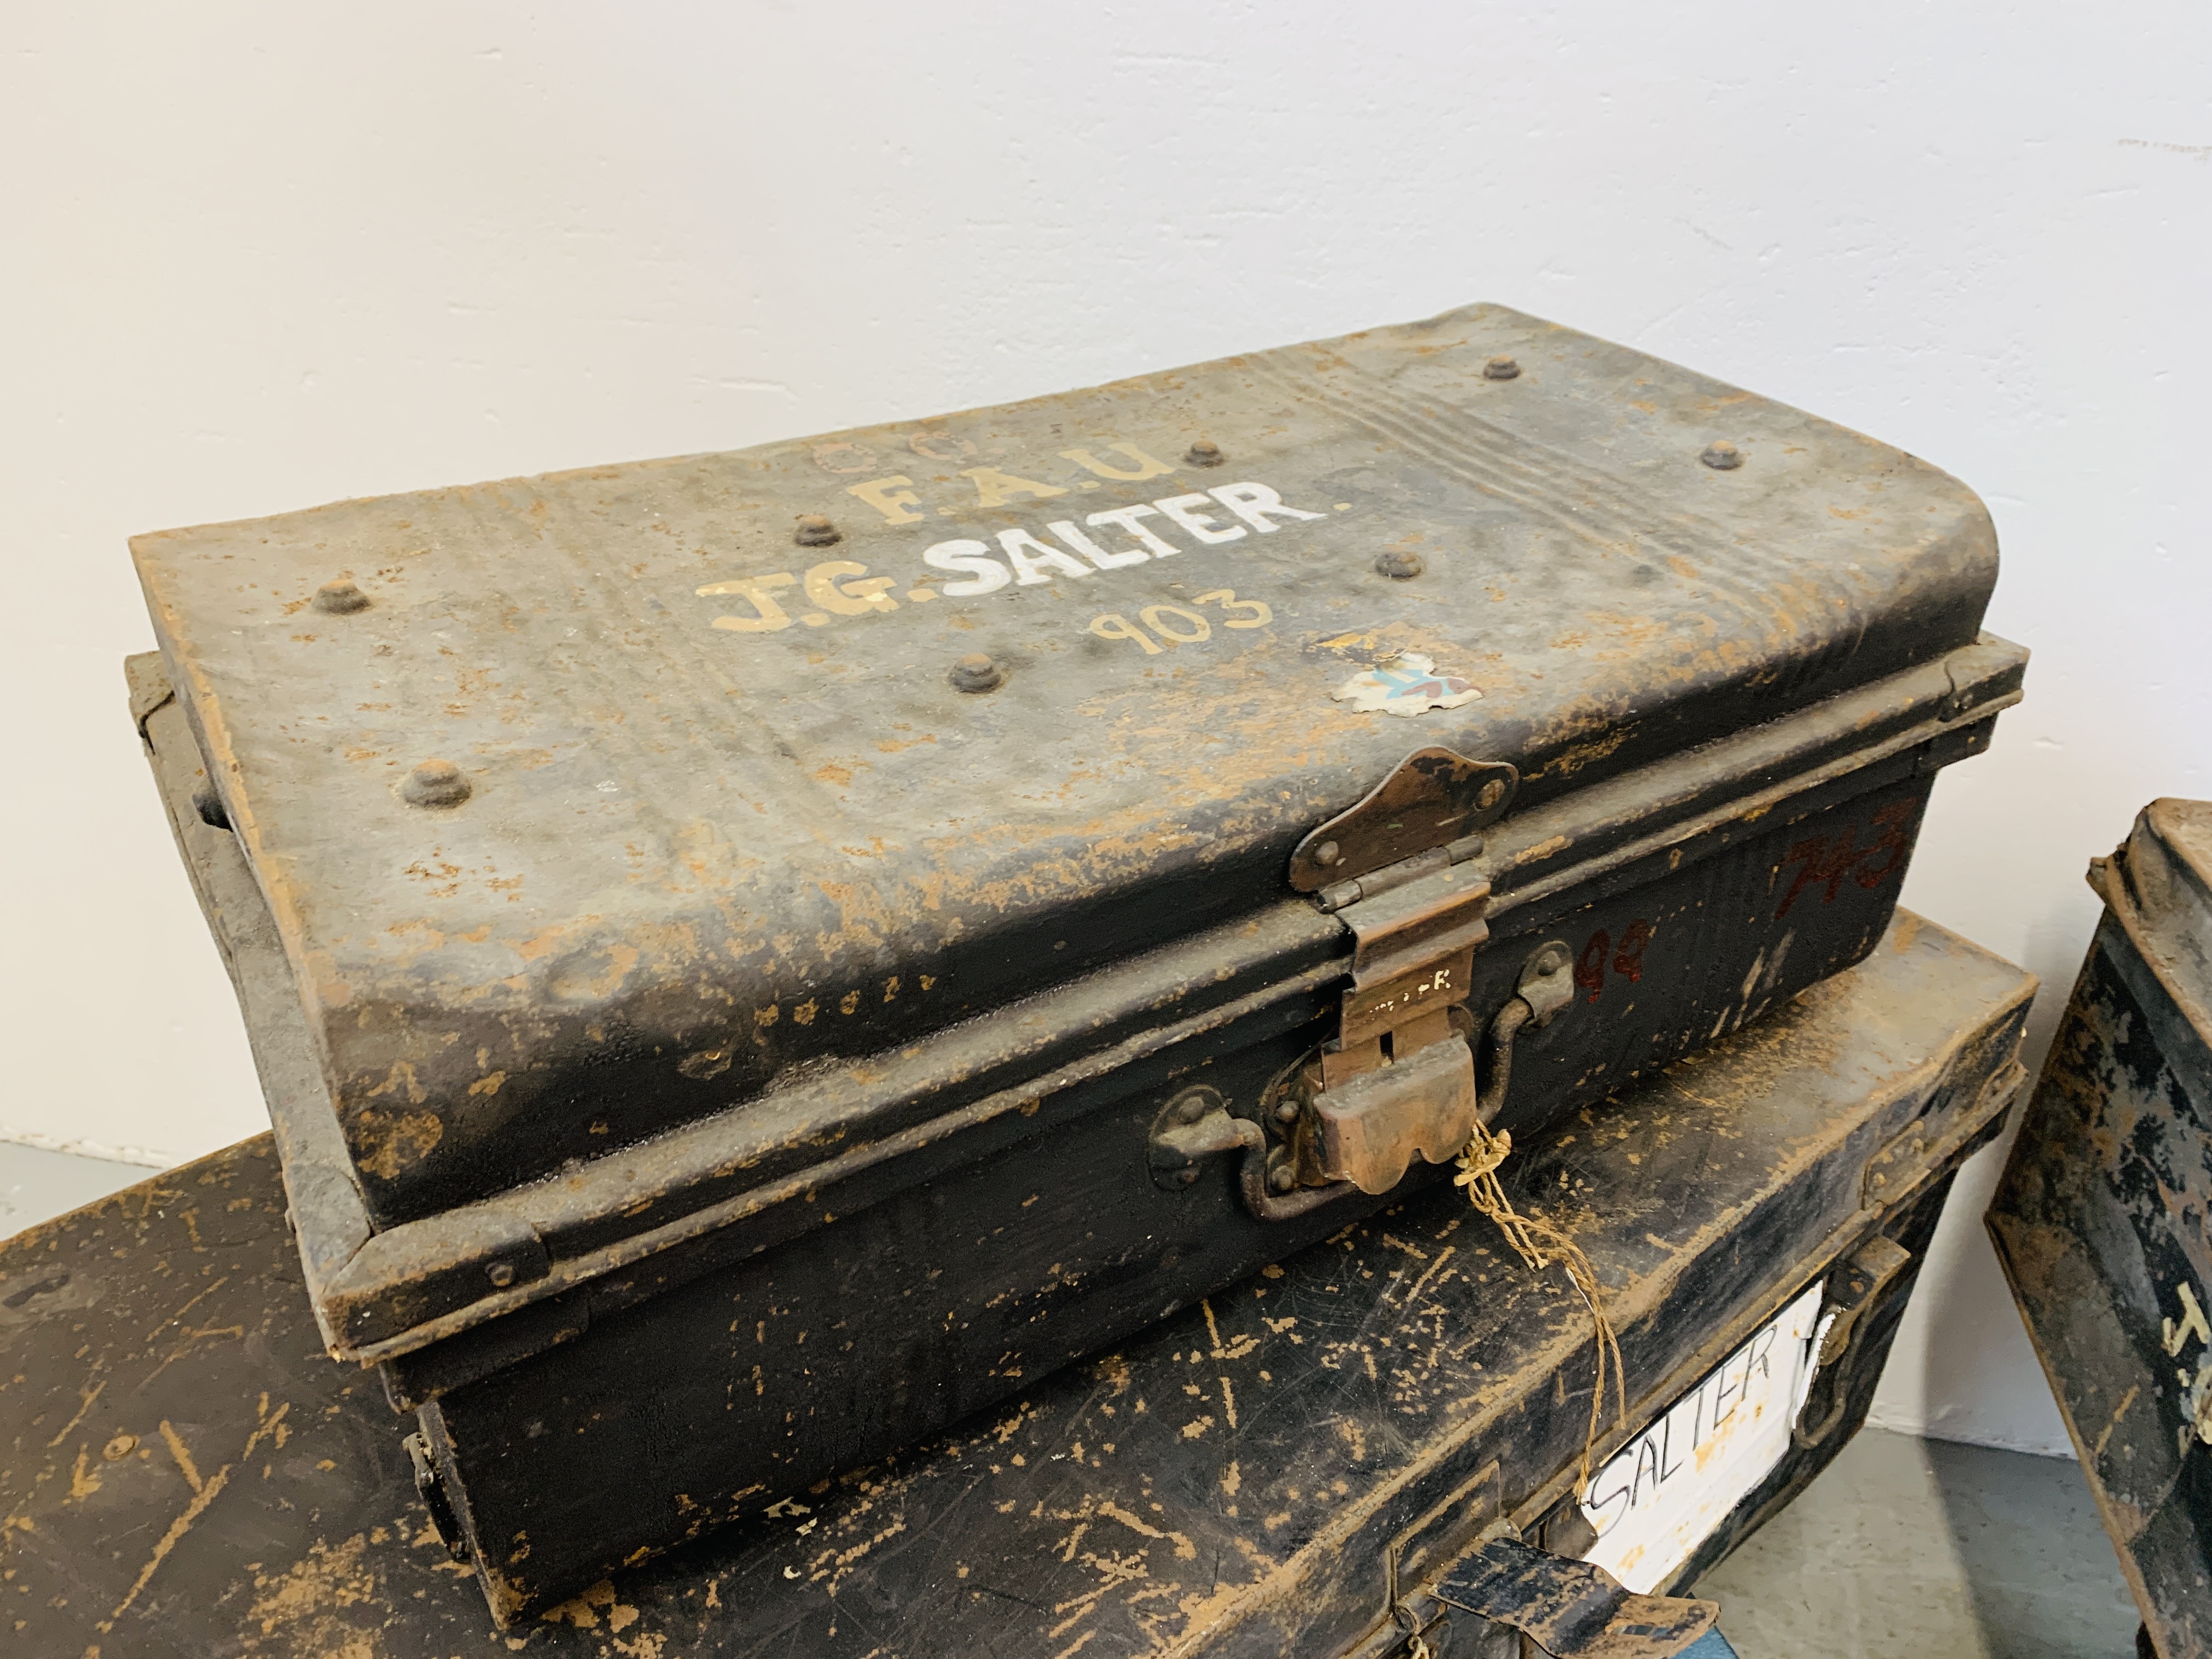 COLLECTION OF 5 VINTAGE METAL TRAVELLING TRUNKS - Image 5 of 7